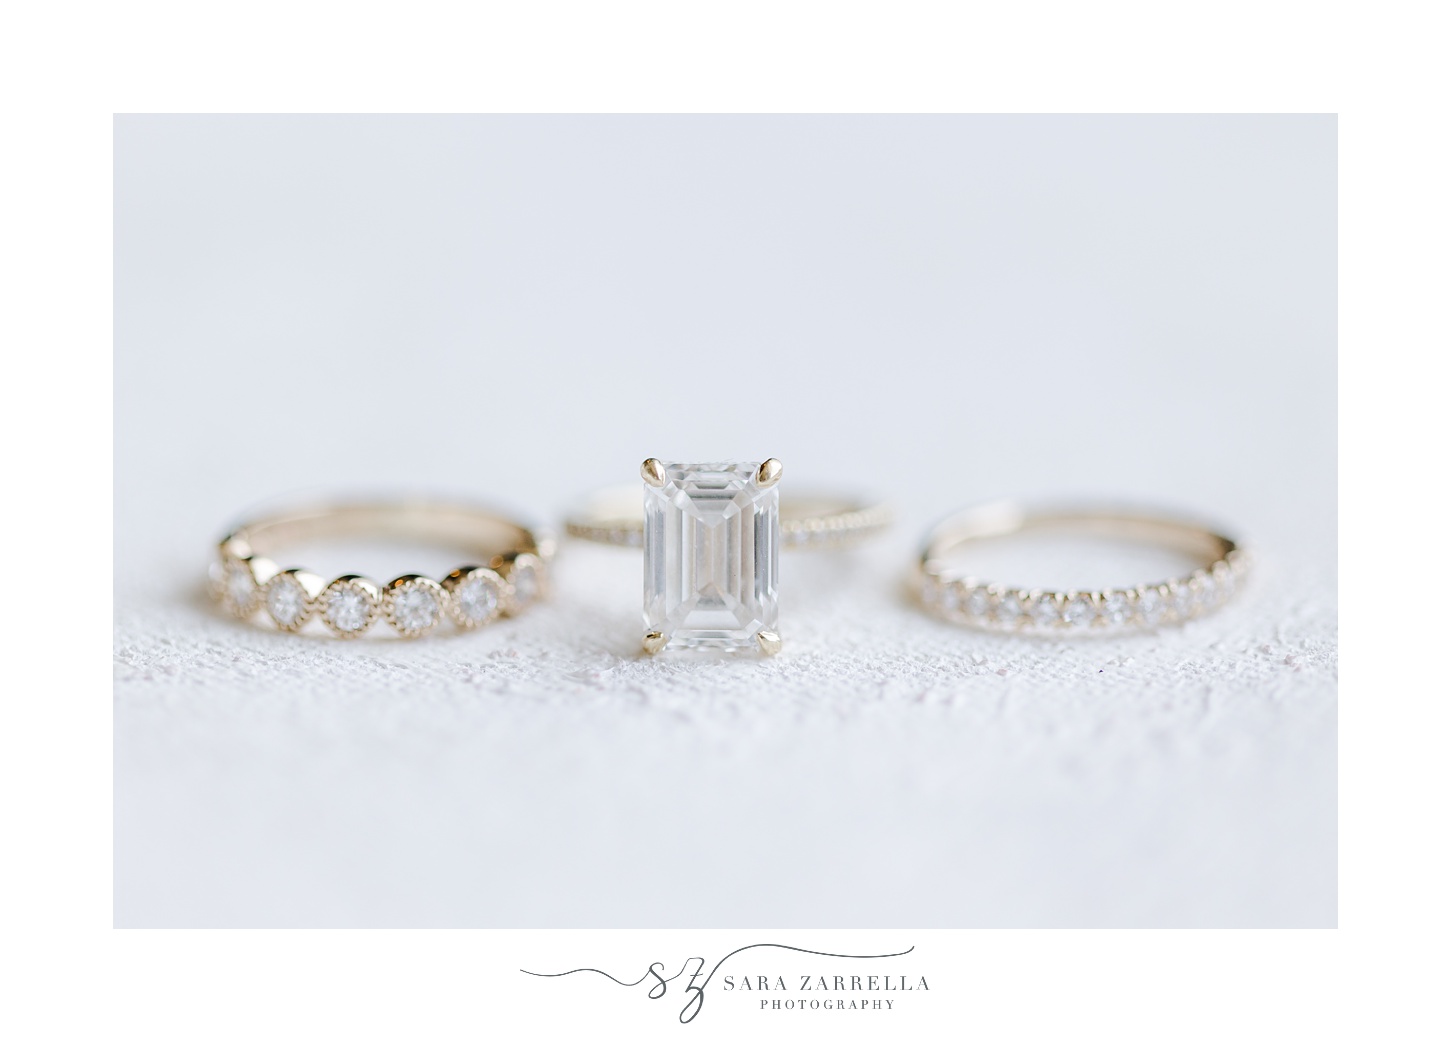 silver and diamond wedding rings rest on marble paper